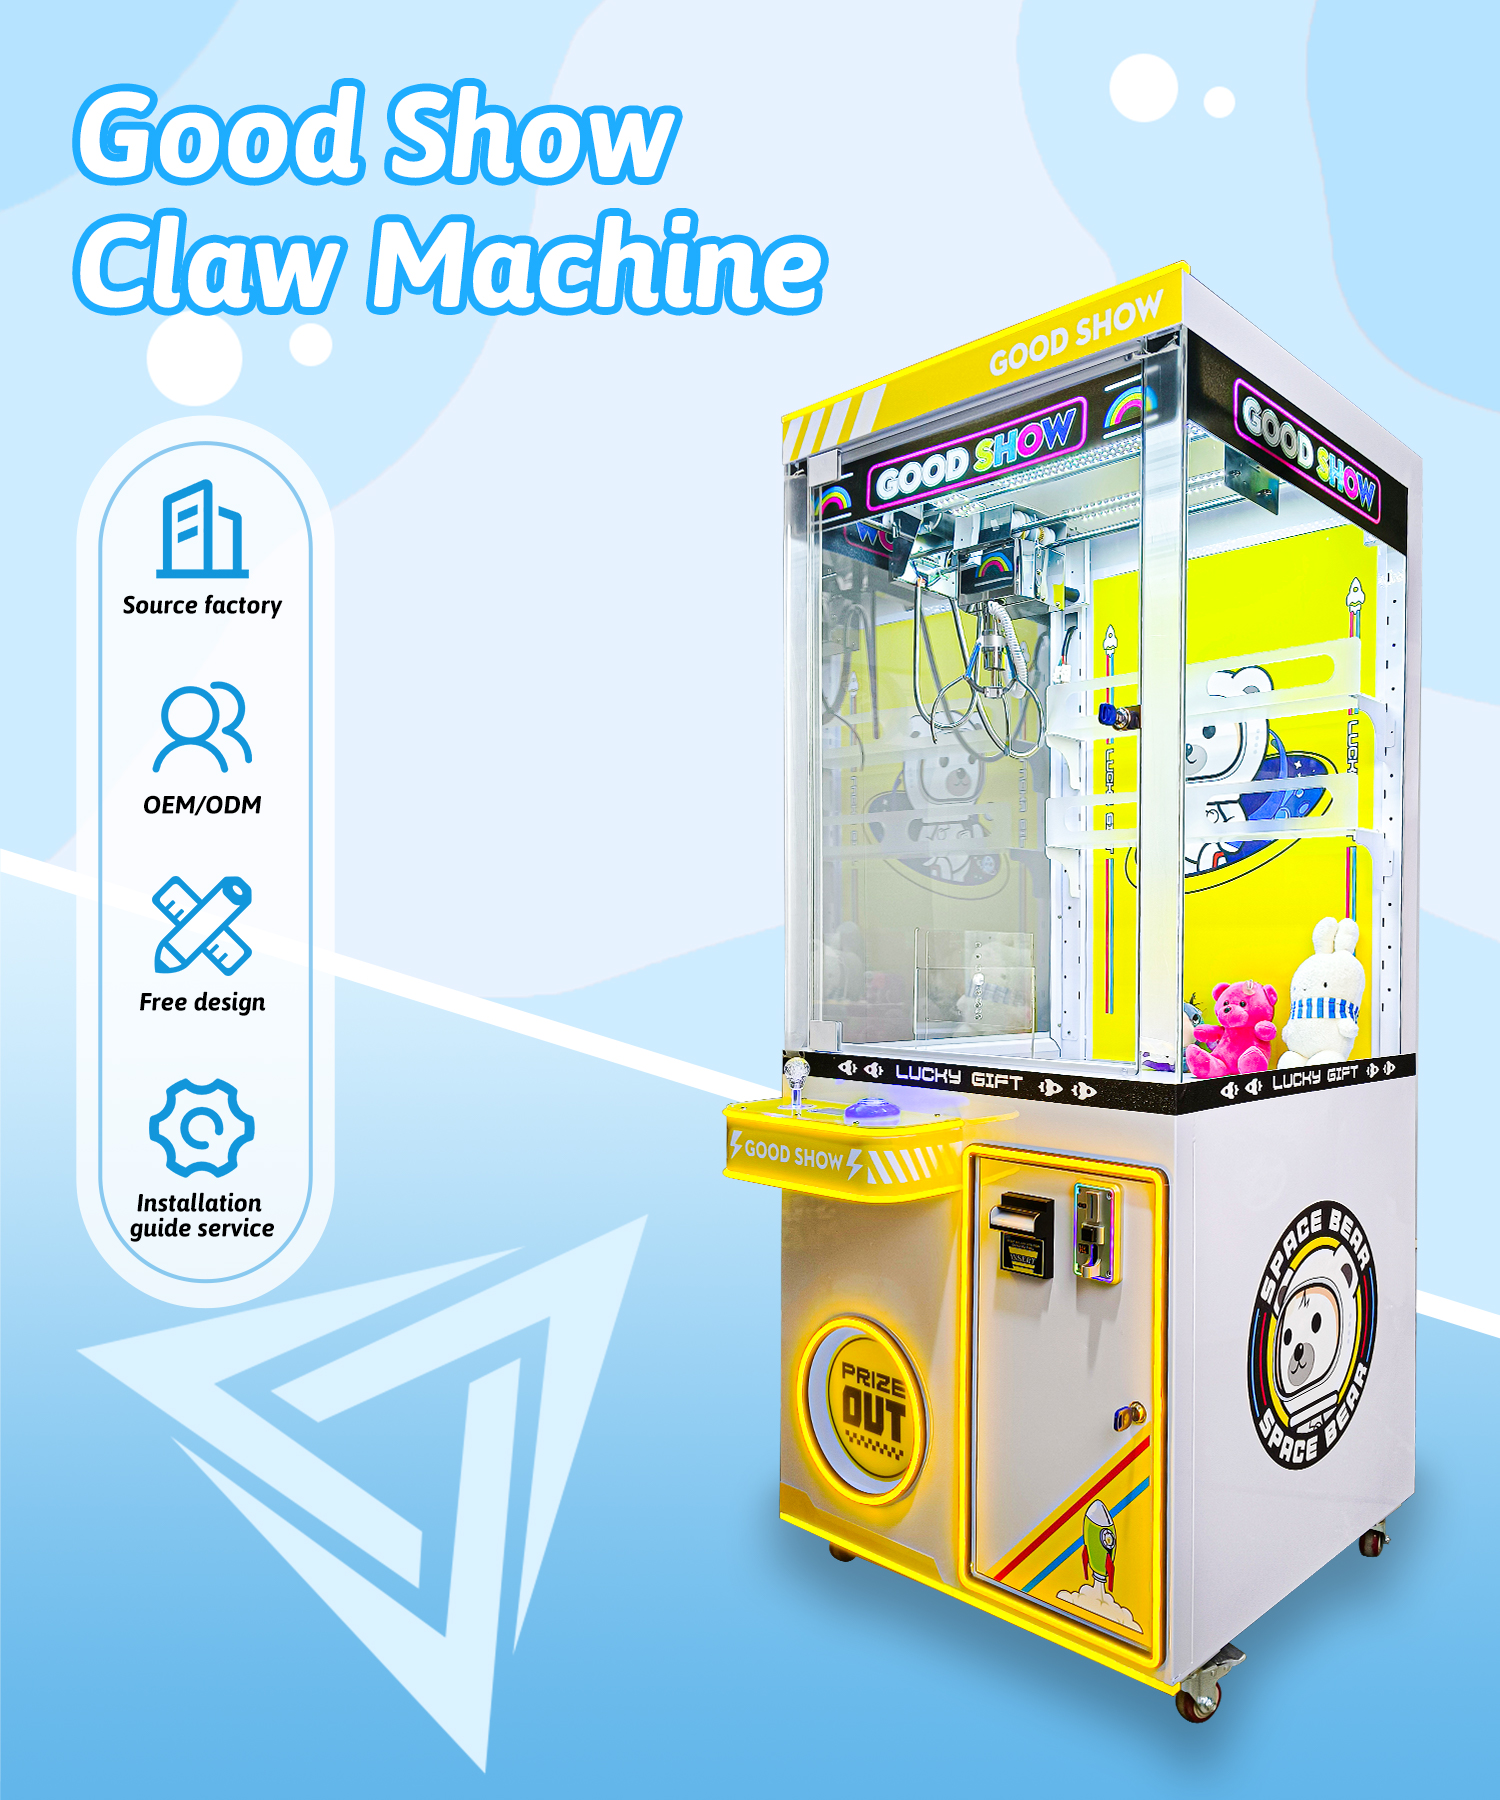 Top 5 Strategies for Maximizing Profits with Claw Crane Machines